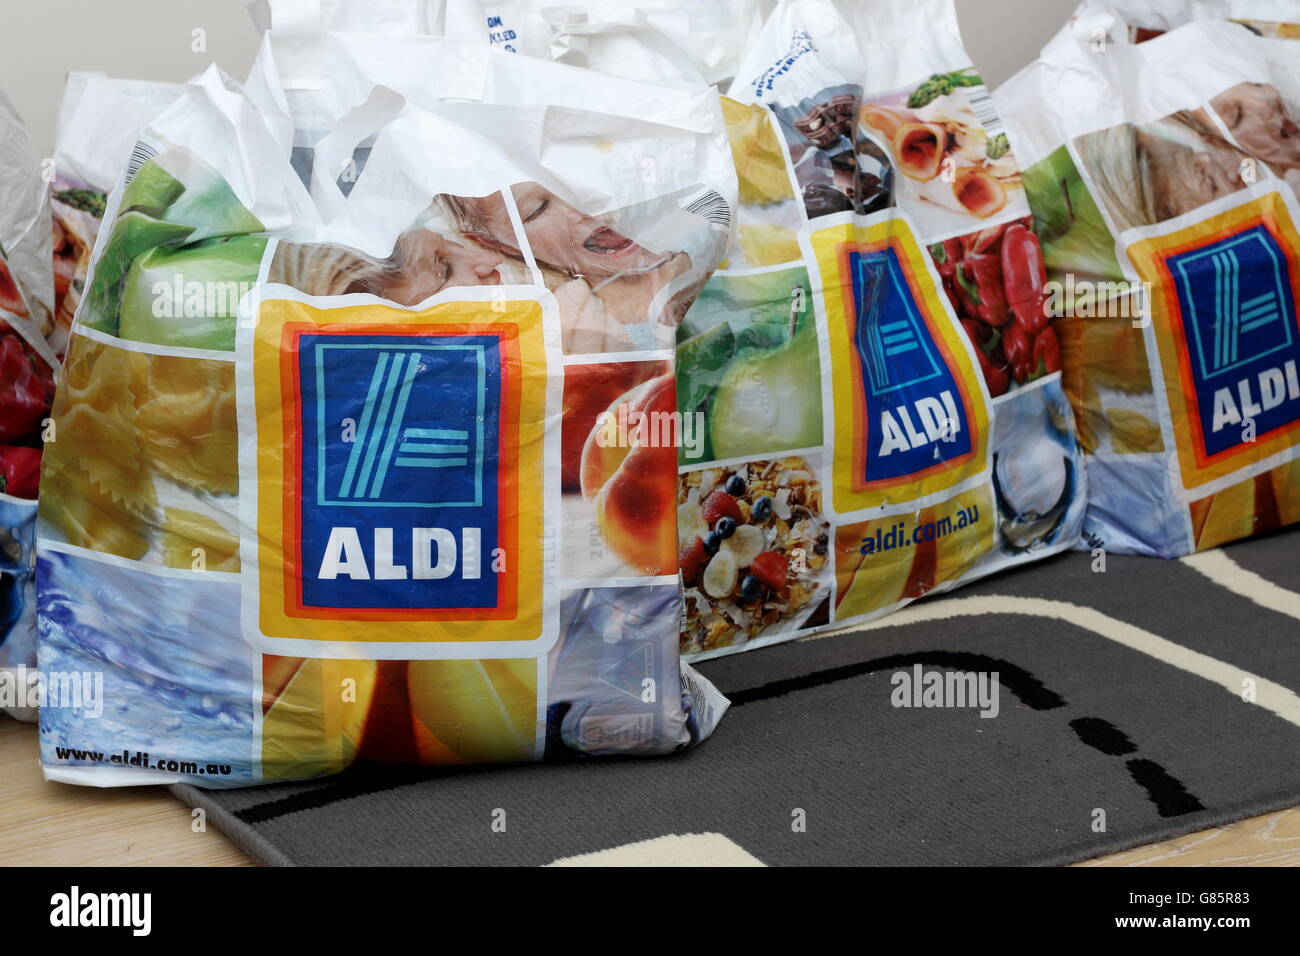 Aldi Bags High Resolution Stock Photography and Images - Alamy